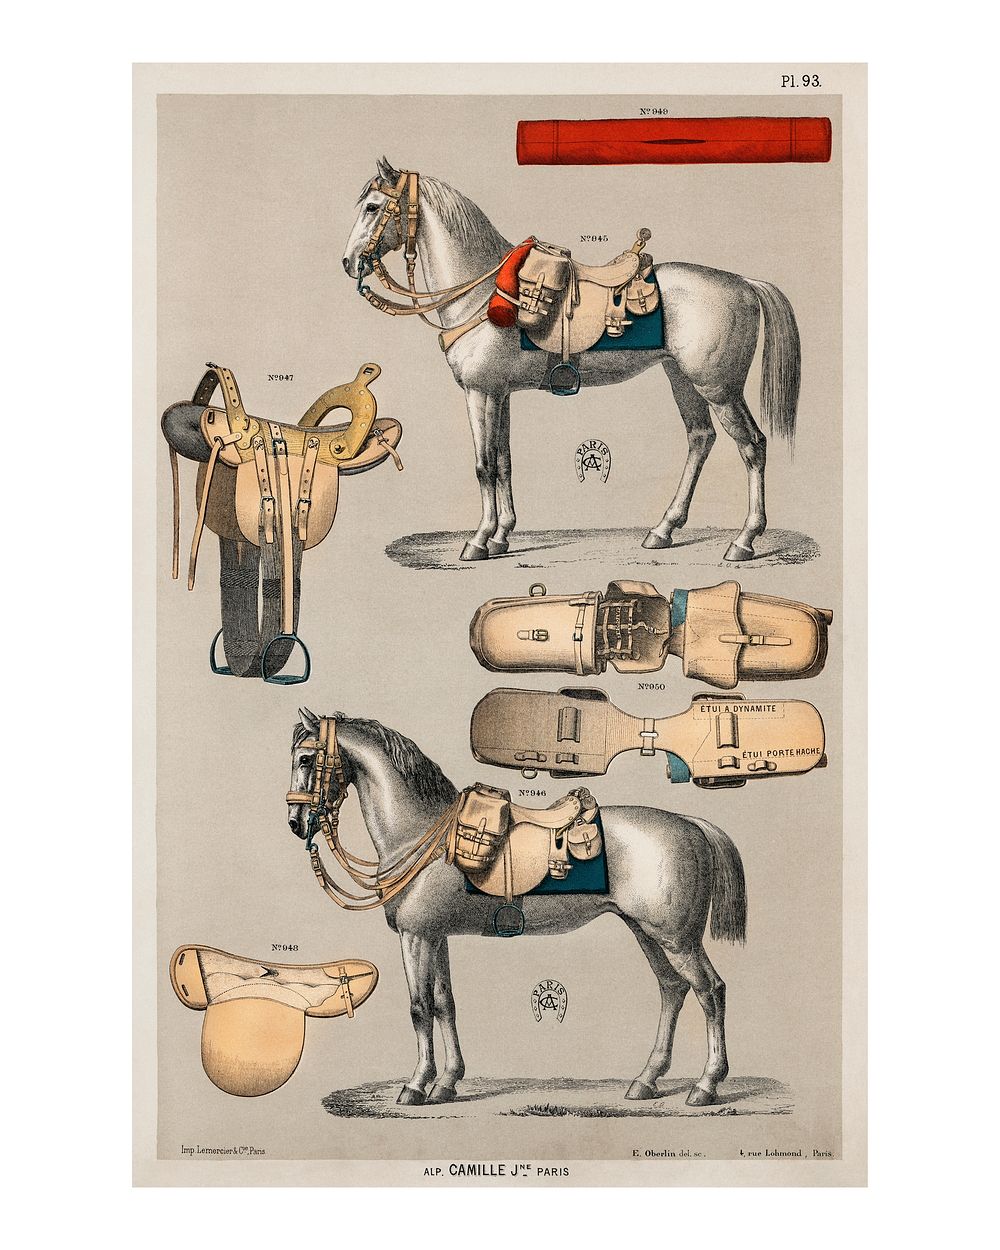 Horses with antique horseback riding equipments illustration wall art print and poster design remix from original artwork.